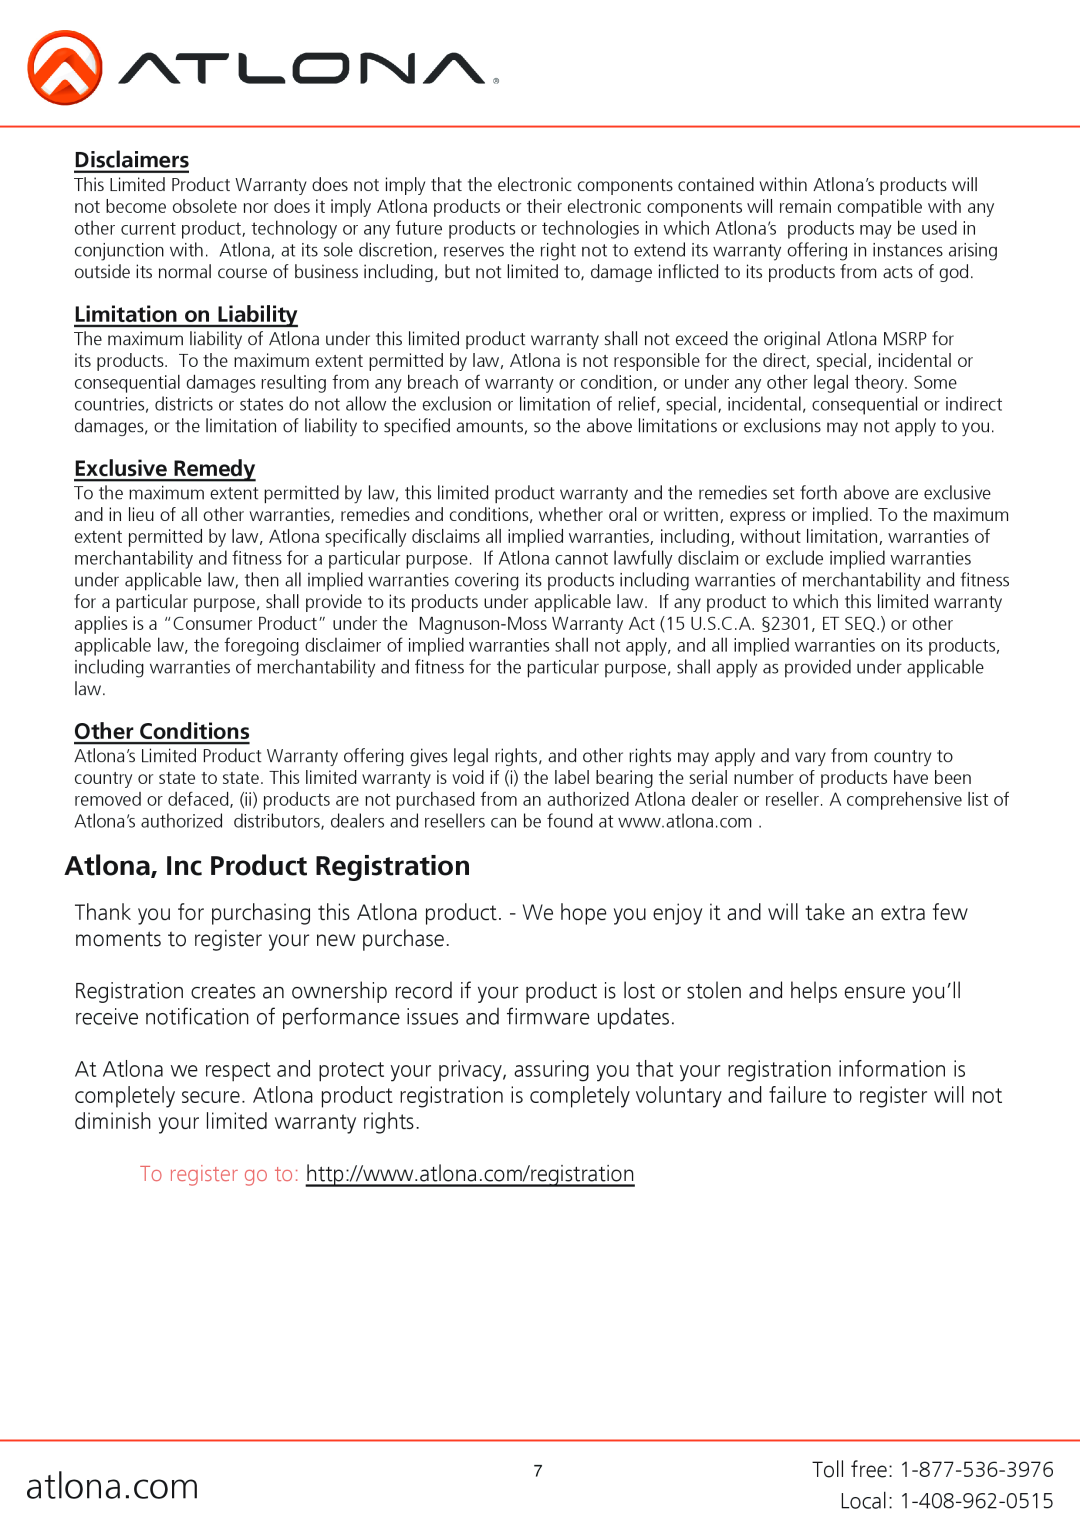 Atlona AT-HDMI-EQ2 user manual Atlona, Inc Product Registration, Disclaimers, Limitation on Liability, Exclusive Remedy 